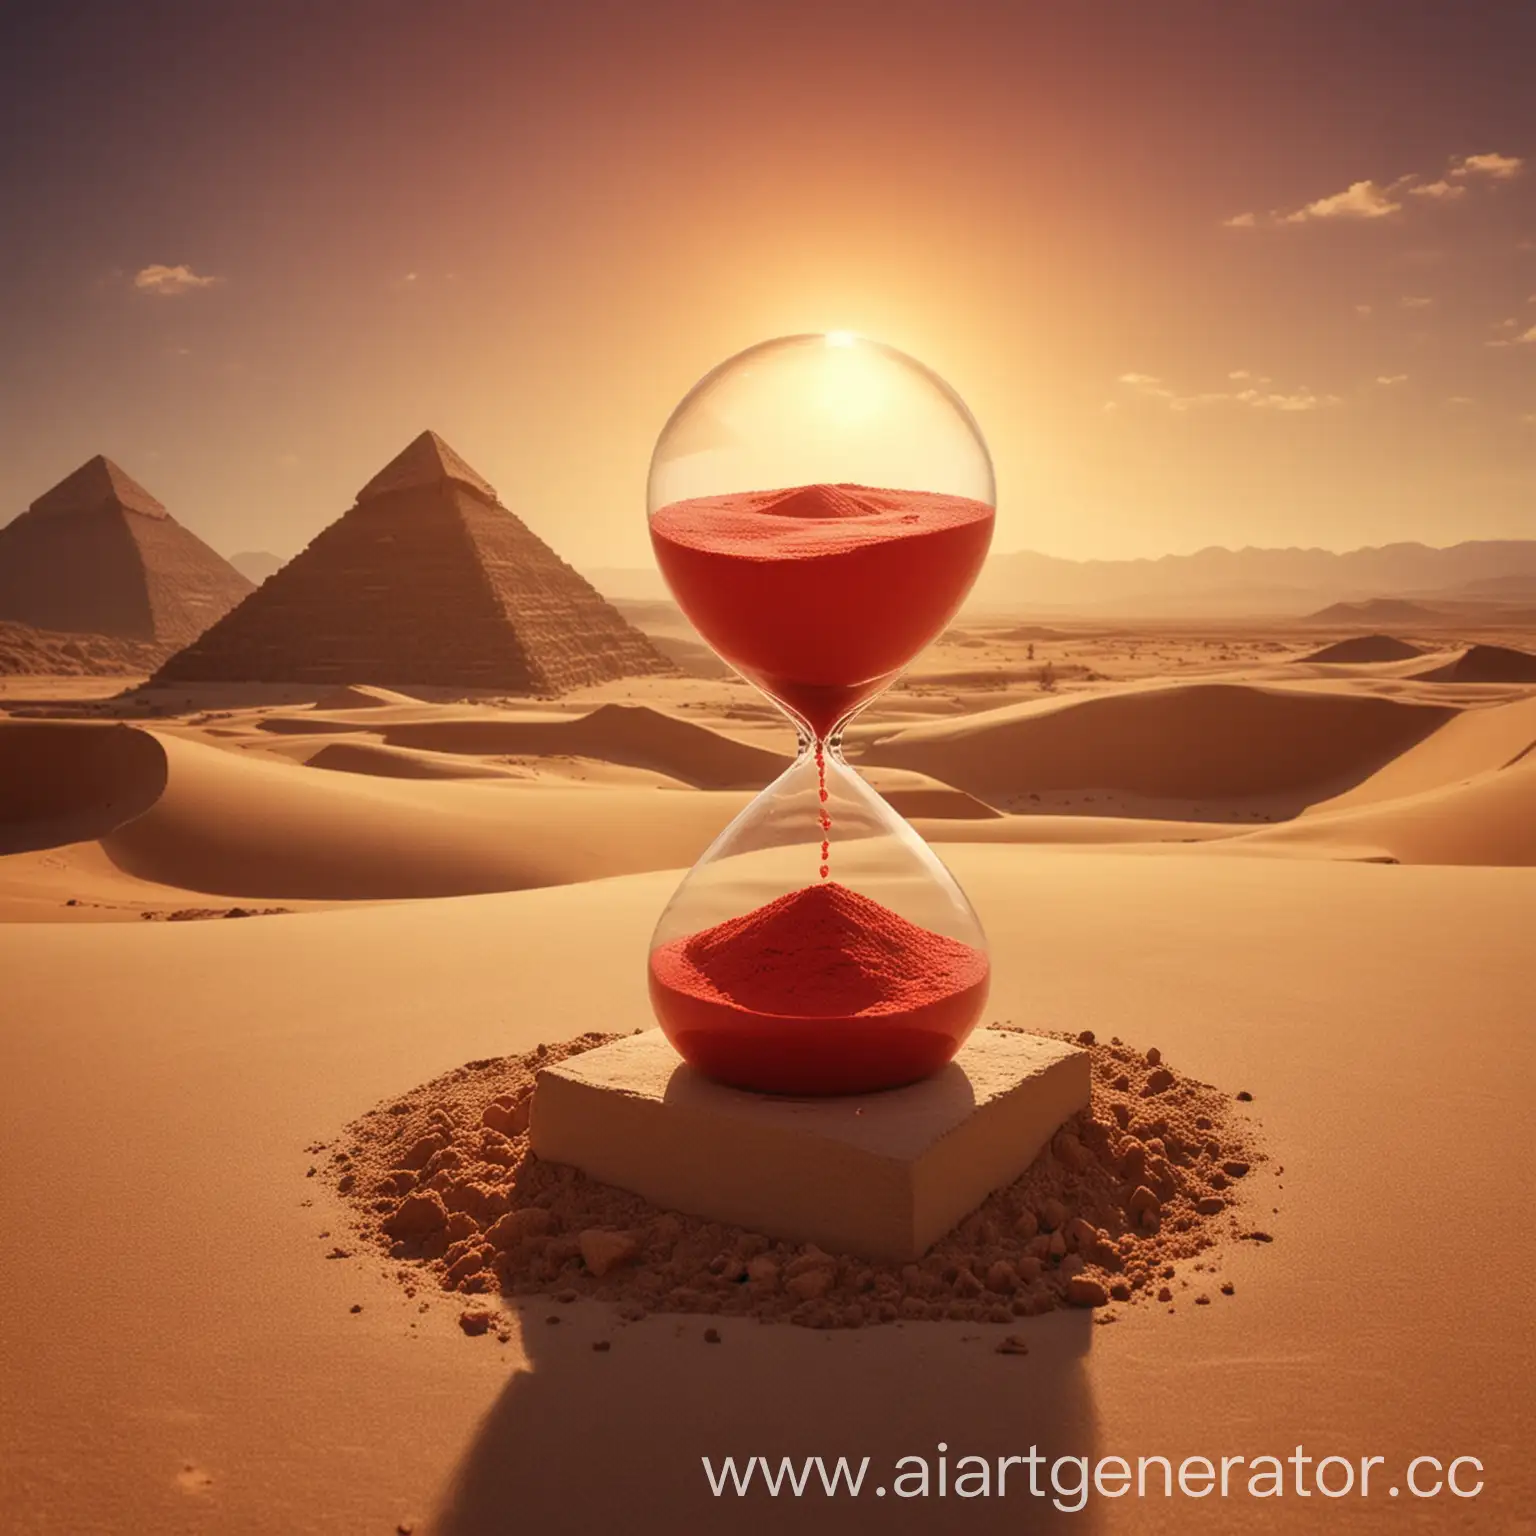 Desert-Pyramid-and-Sand-Hourglass-with-Red-Sun